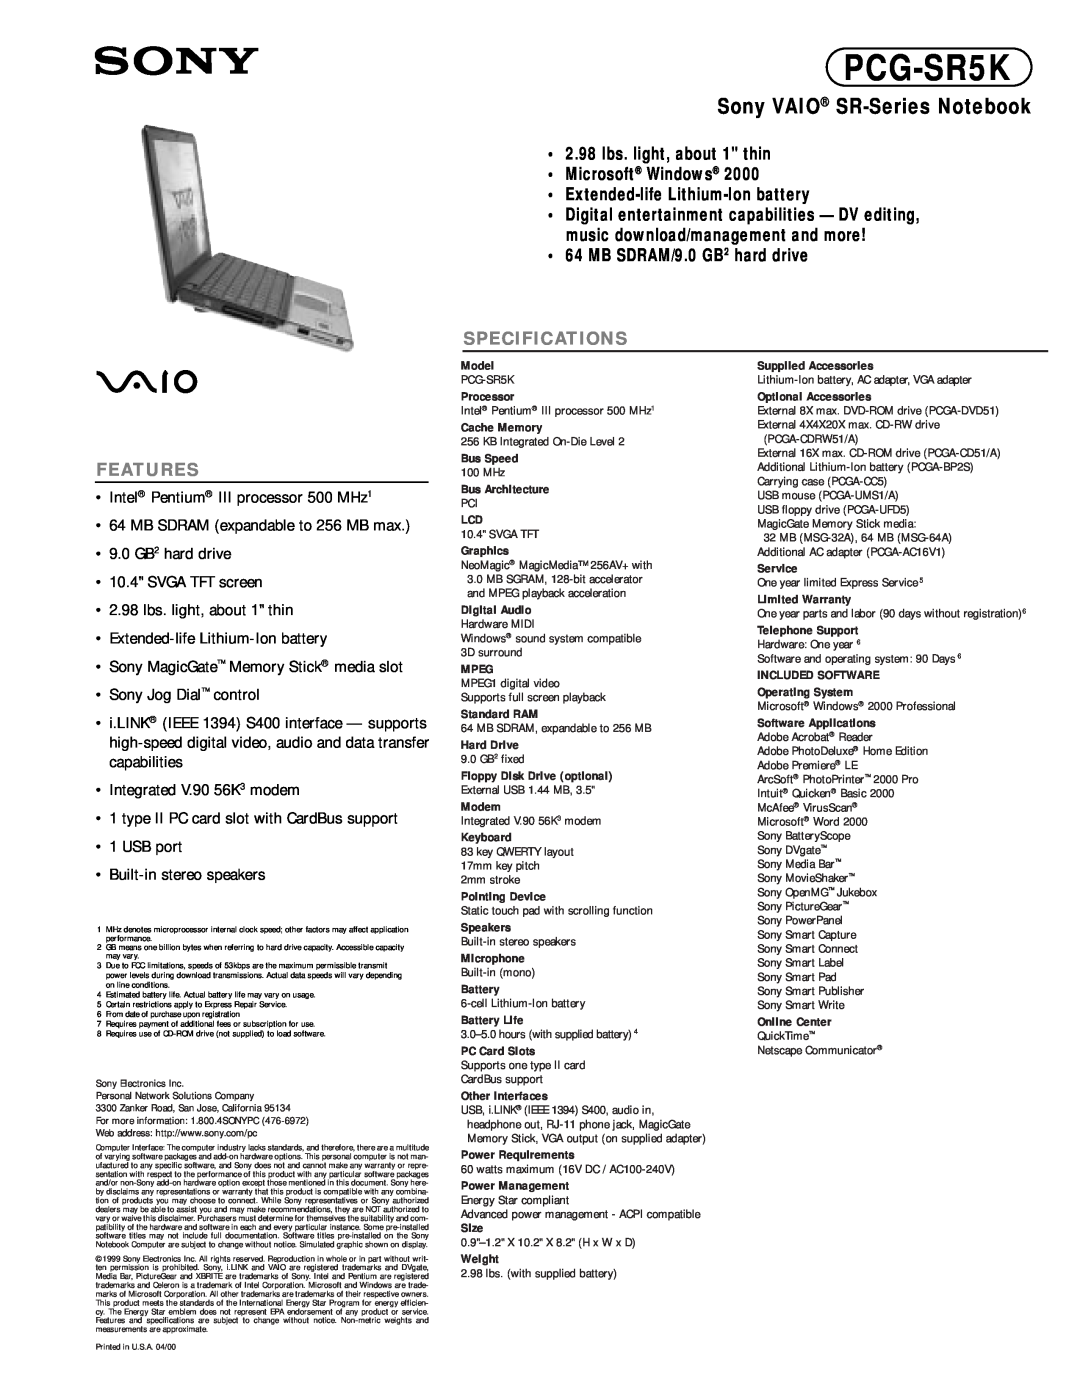 Sony PCG-SR5K specifications Sony VAIO SR-Series Notebook, 2.98 lbs. light, about 1 thin Microsoft Windows, Specifications 